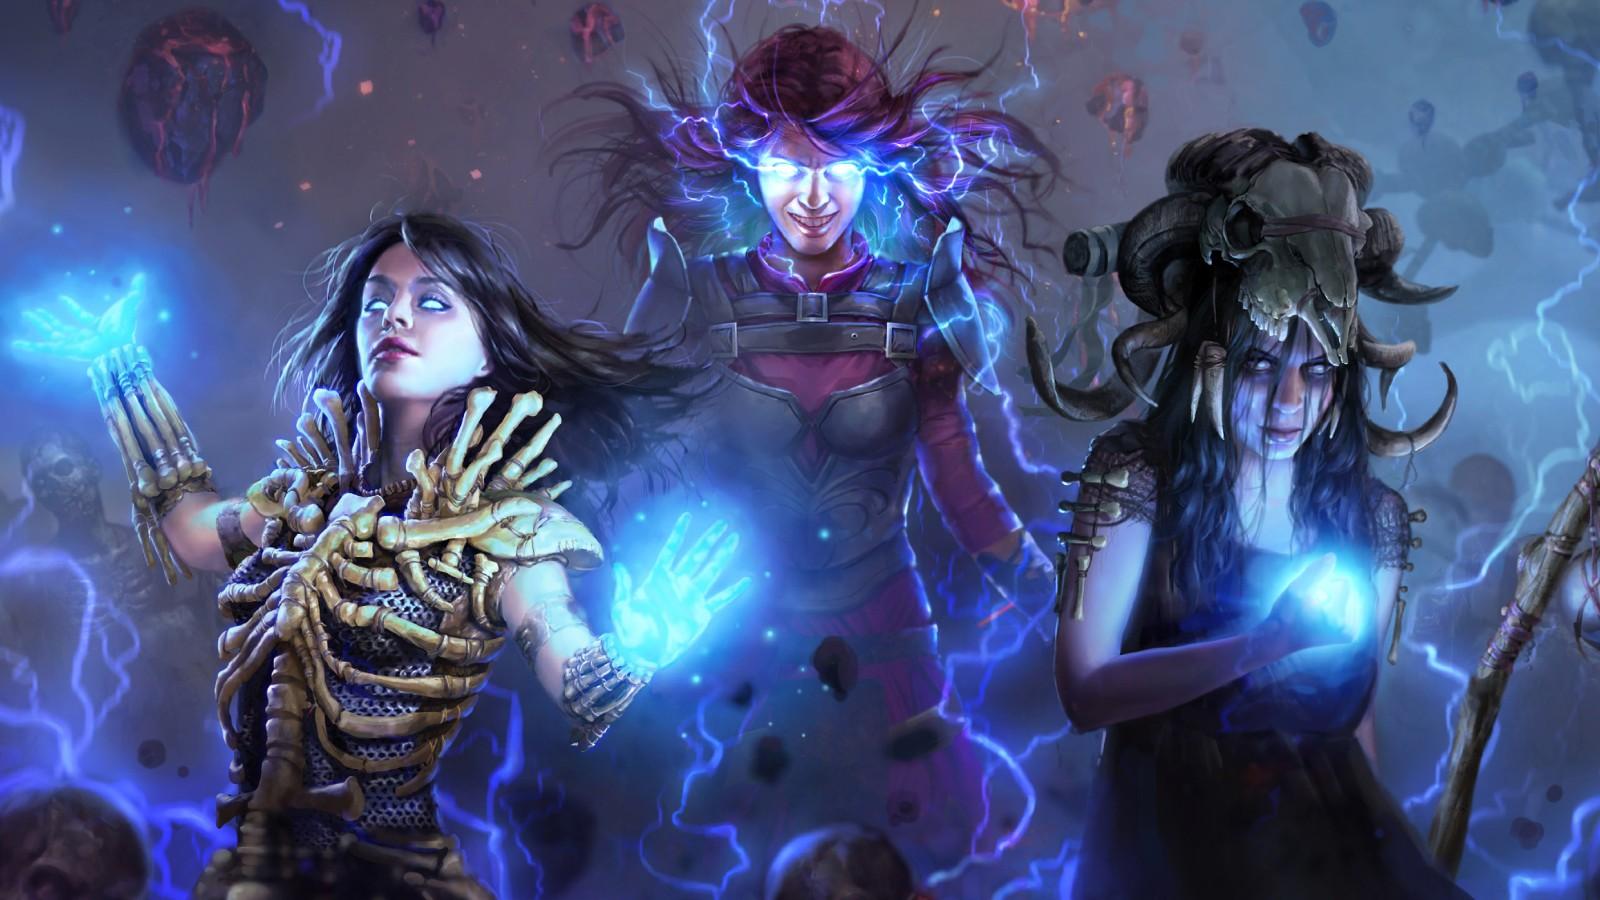 An image of Path of Exile artwork, a game where players can trade in.